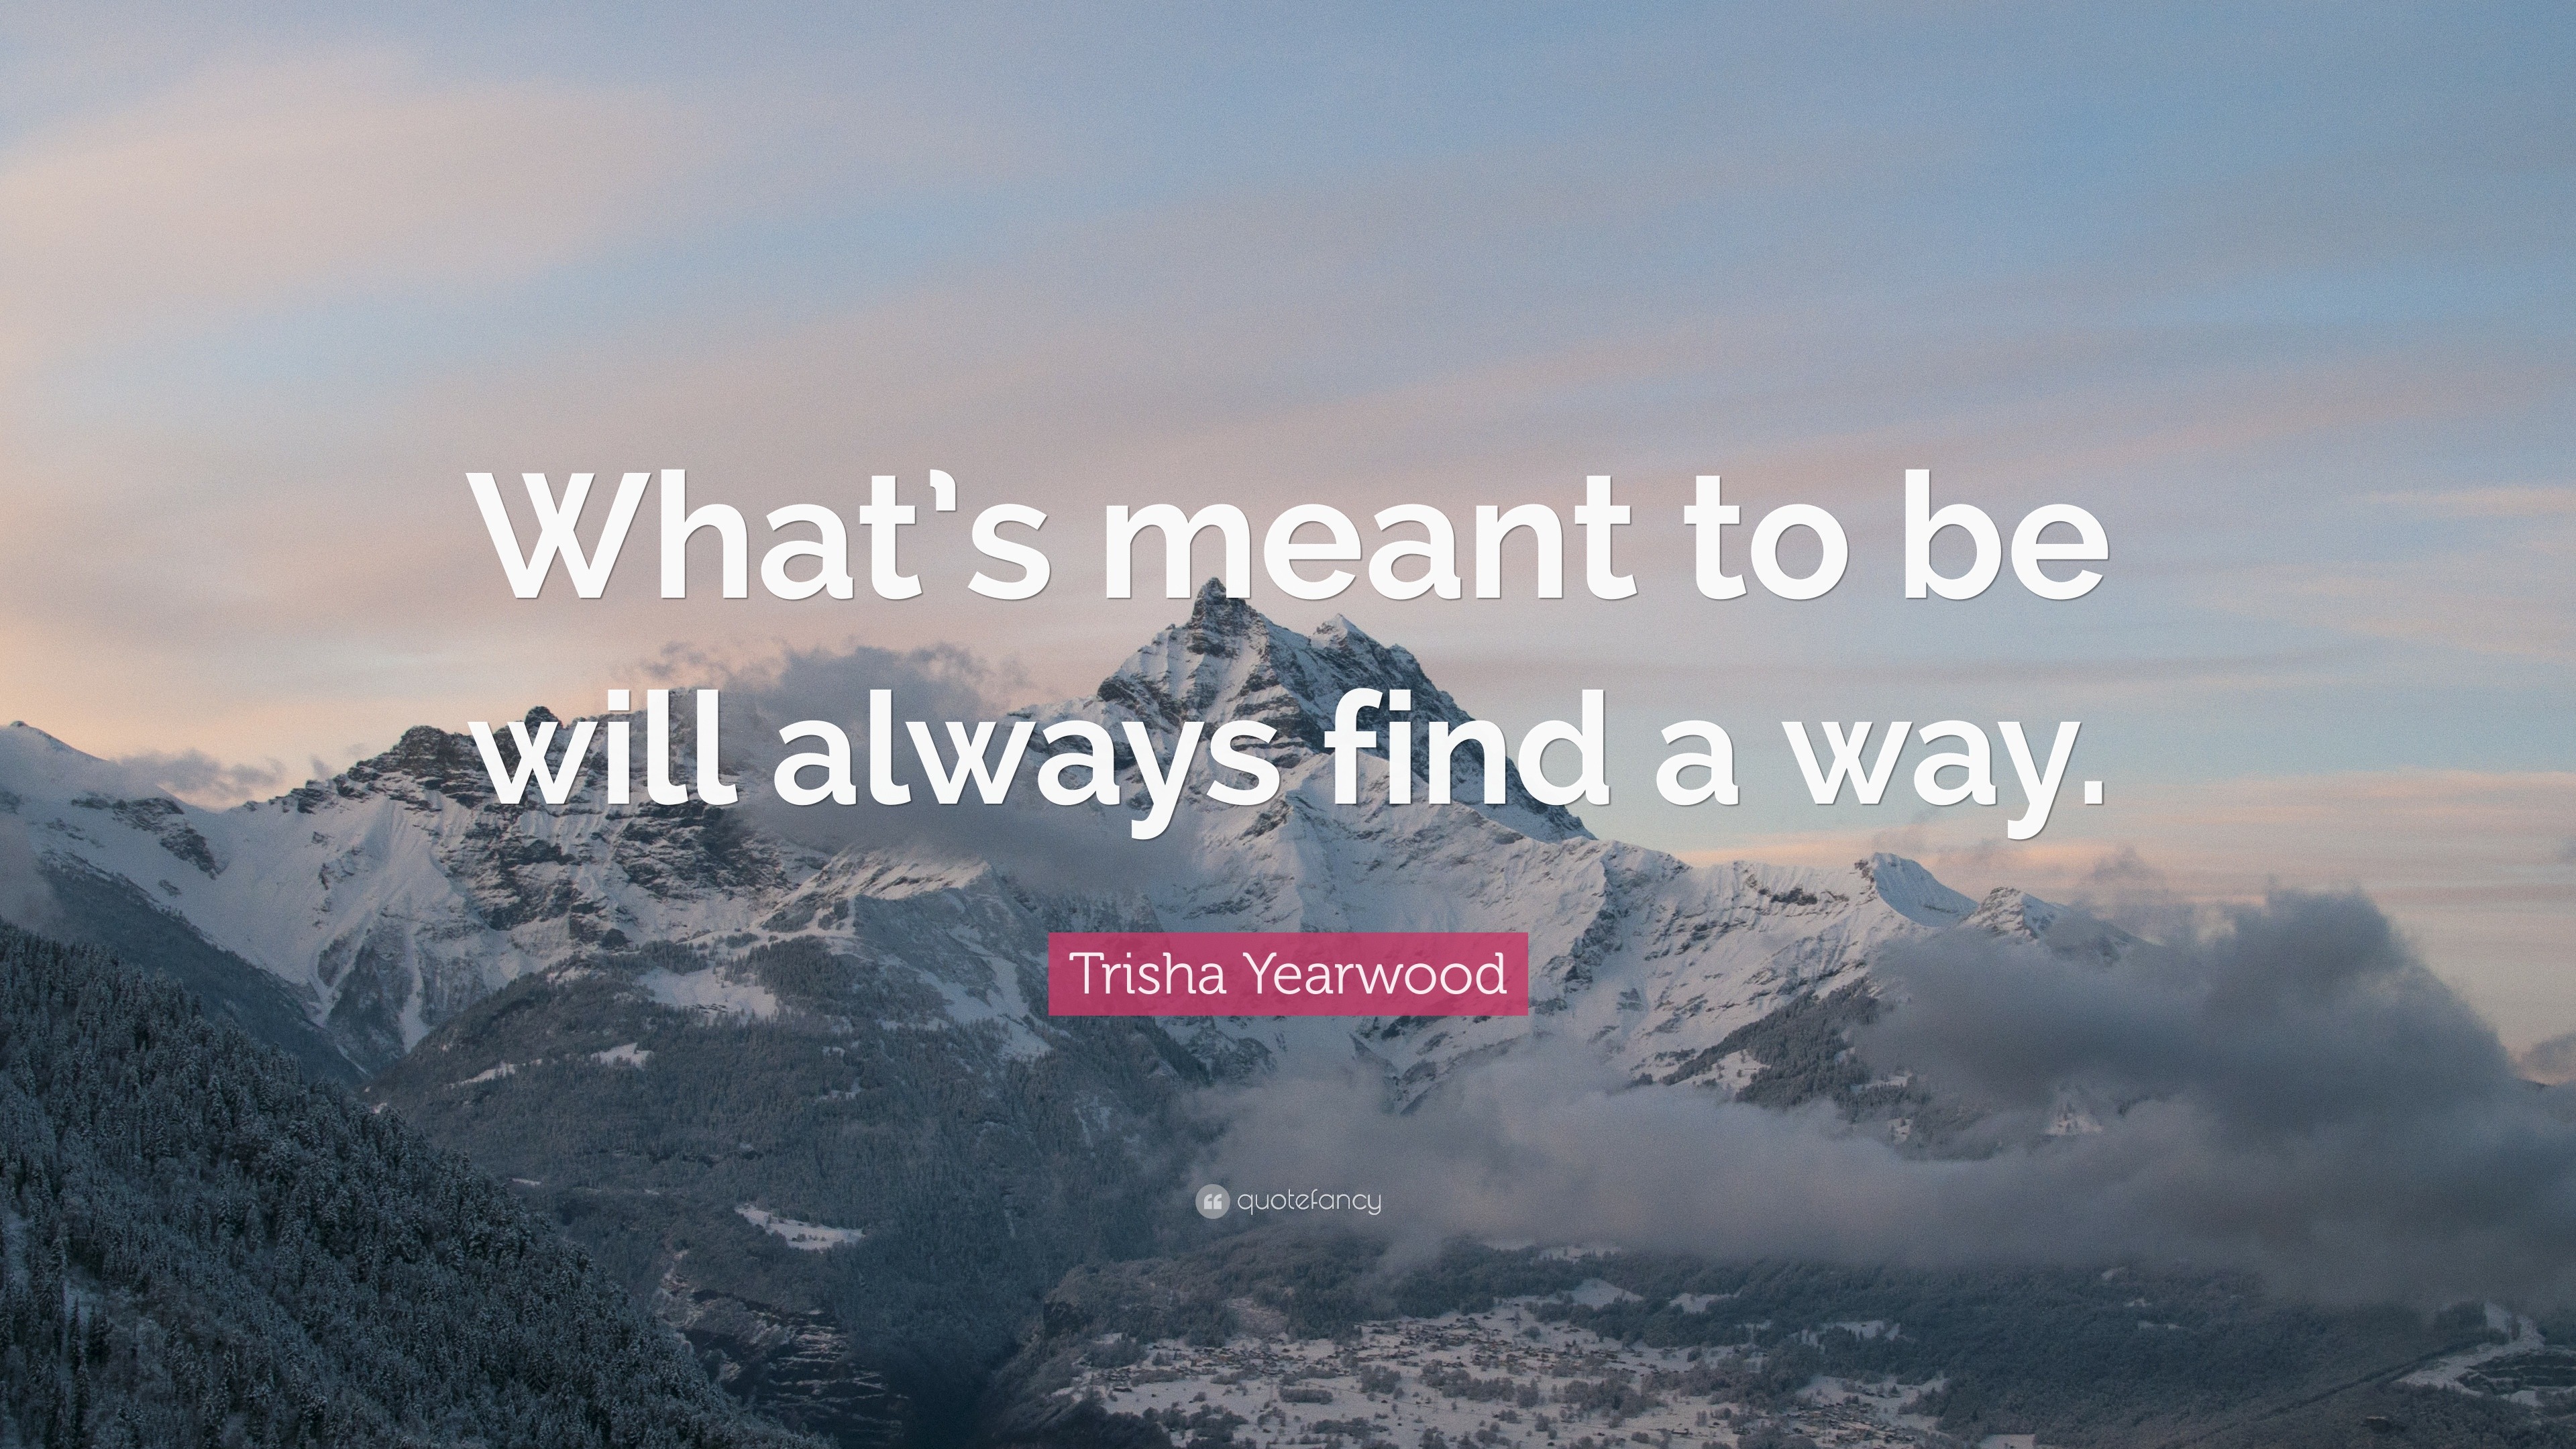 Trisha Yearwood Quote: “What’s meant to be will always find a way.”